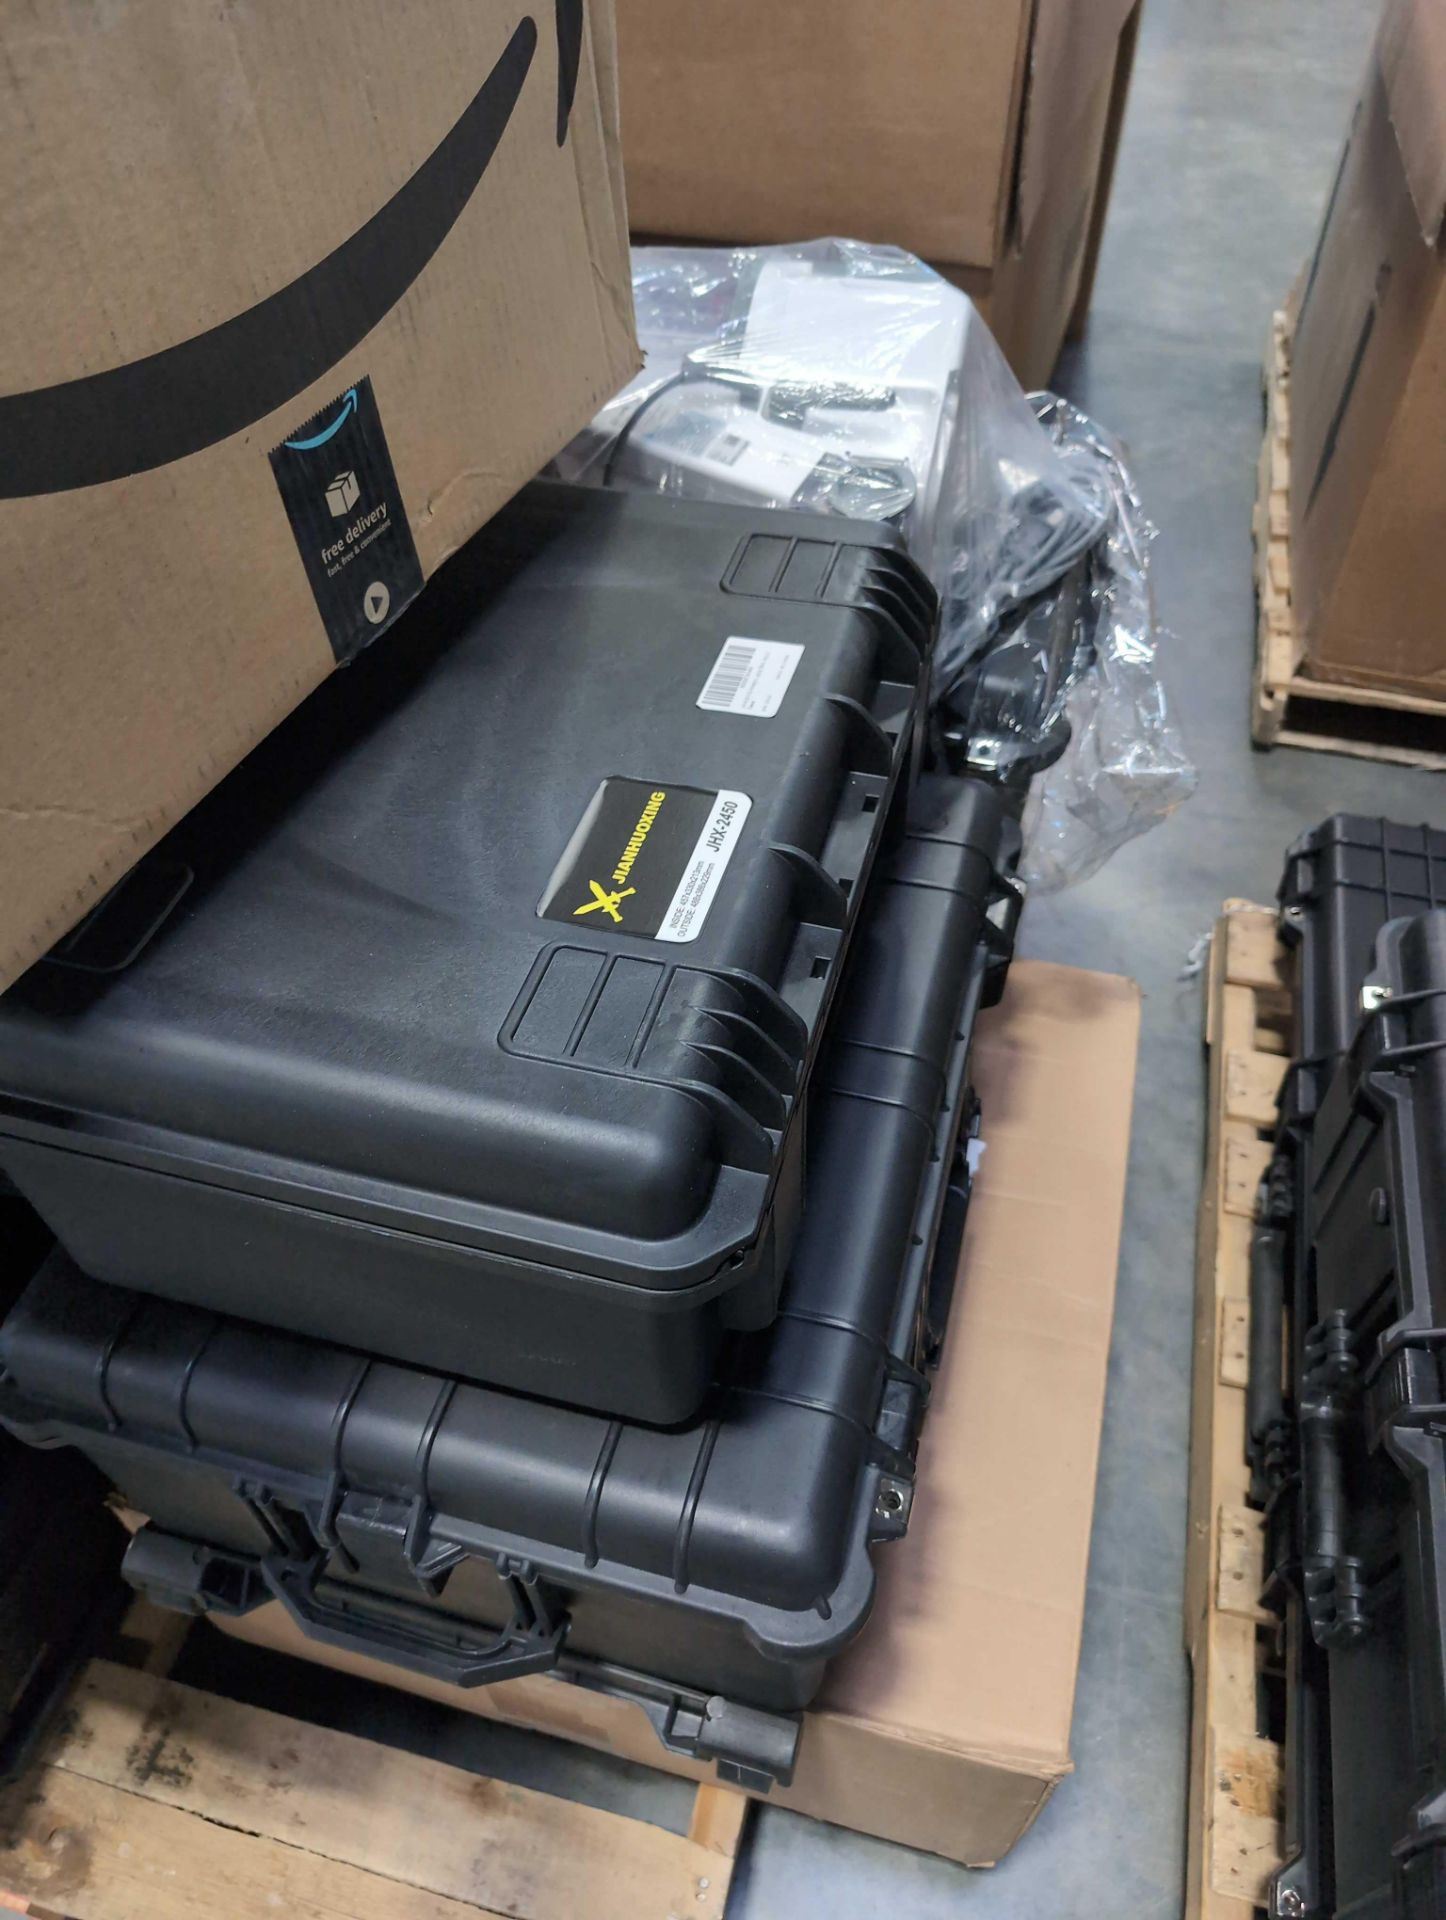 pallet of waterproof travel cases, vacuum and more - Image 8 of 13